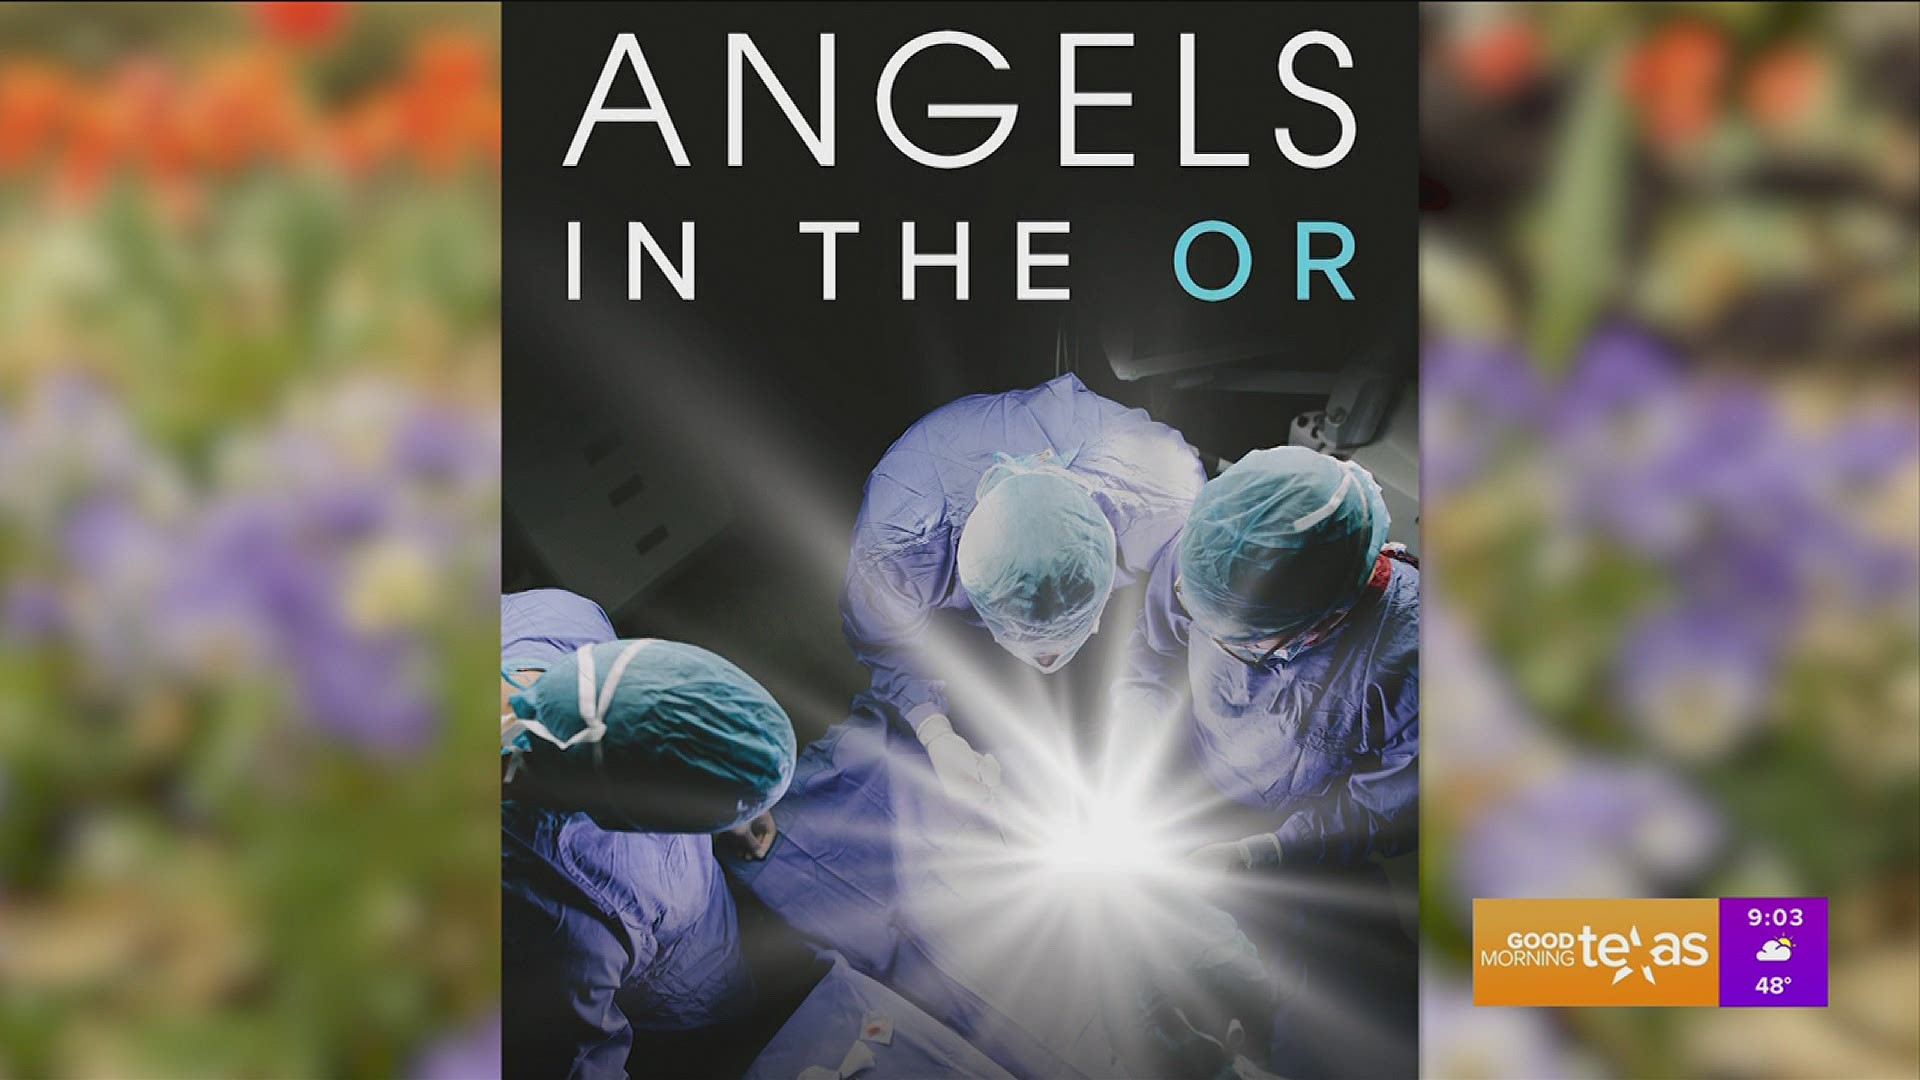 Author and North Texas native Tricia Barker talks about her near death experience in her new book "Angels in the OR: What Dying Taught Me About Healing"